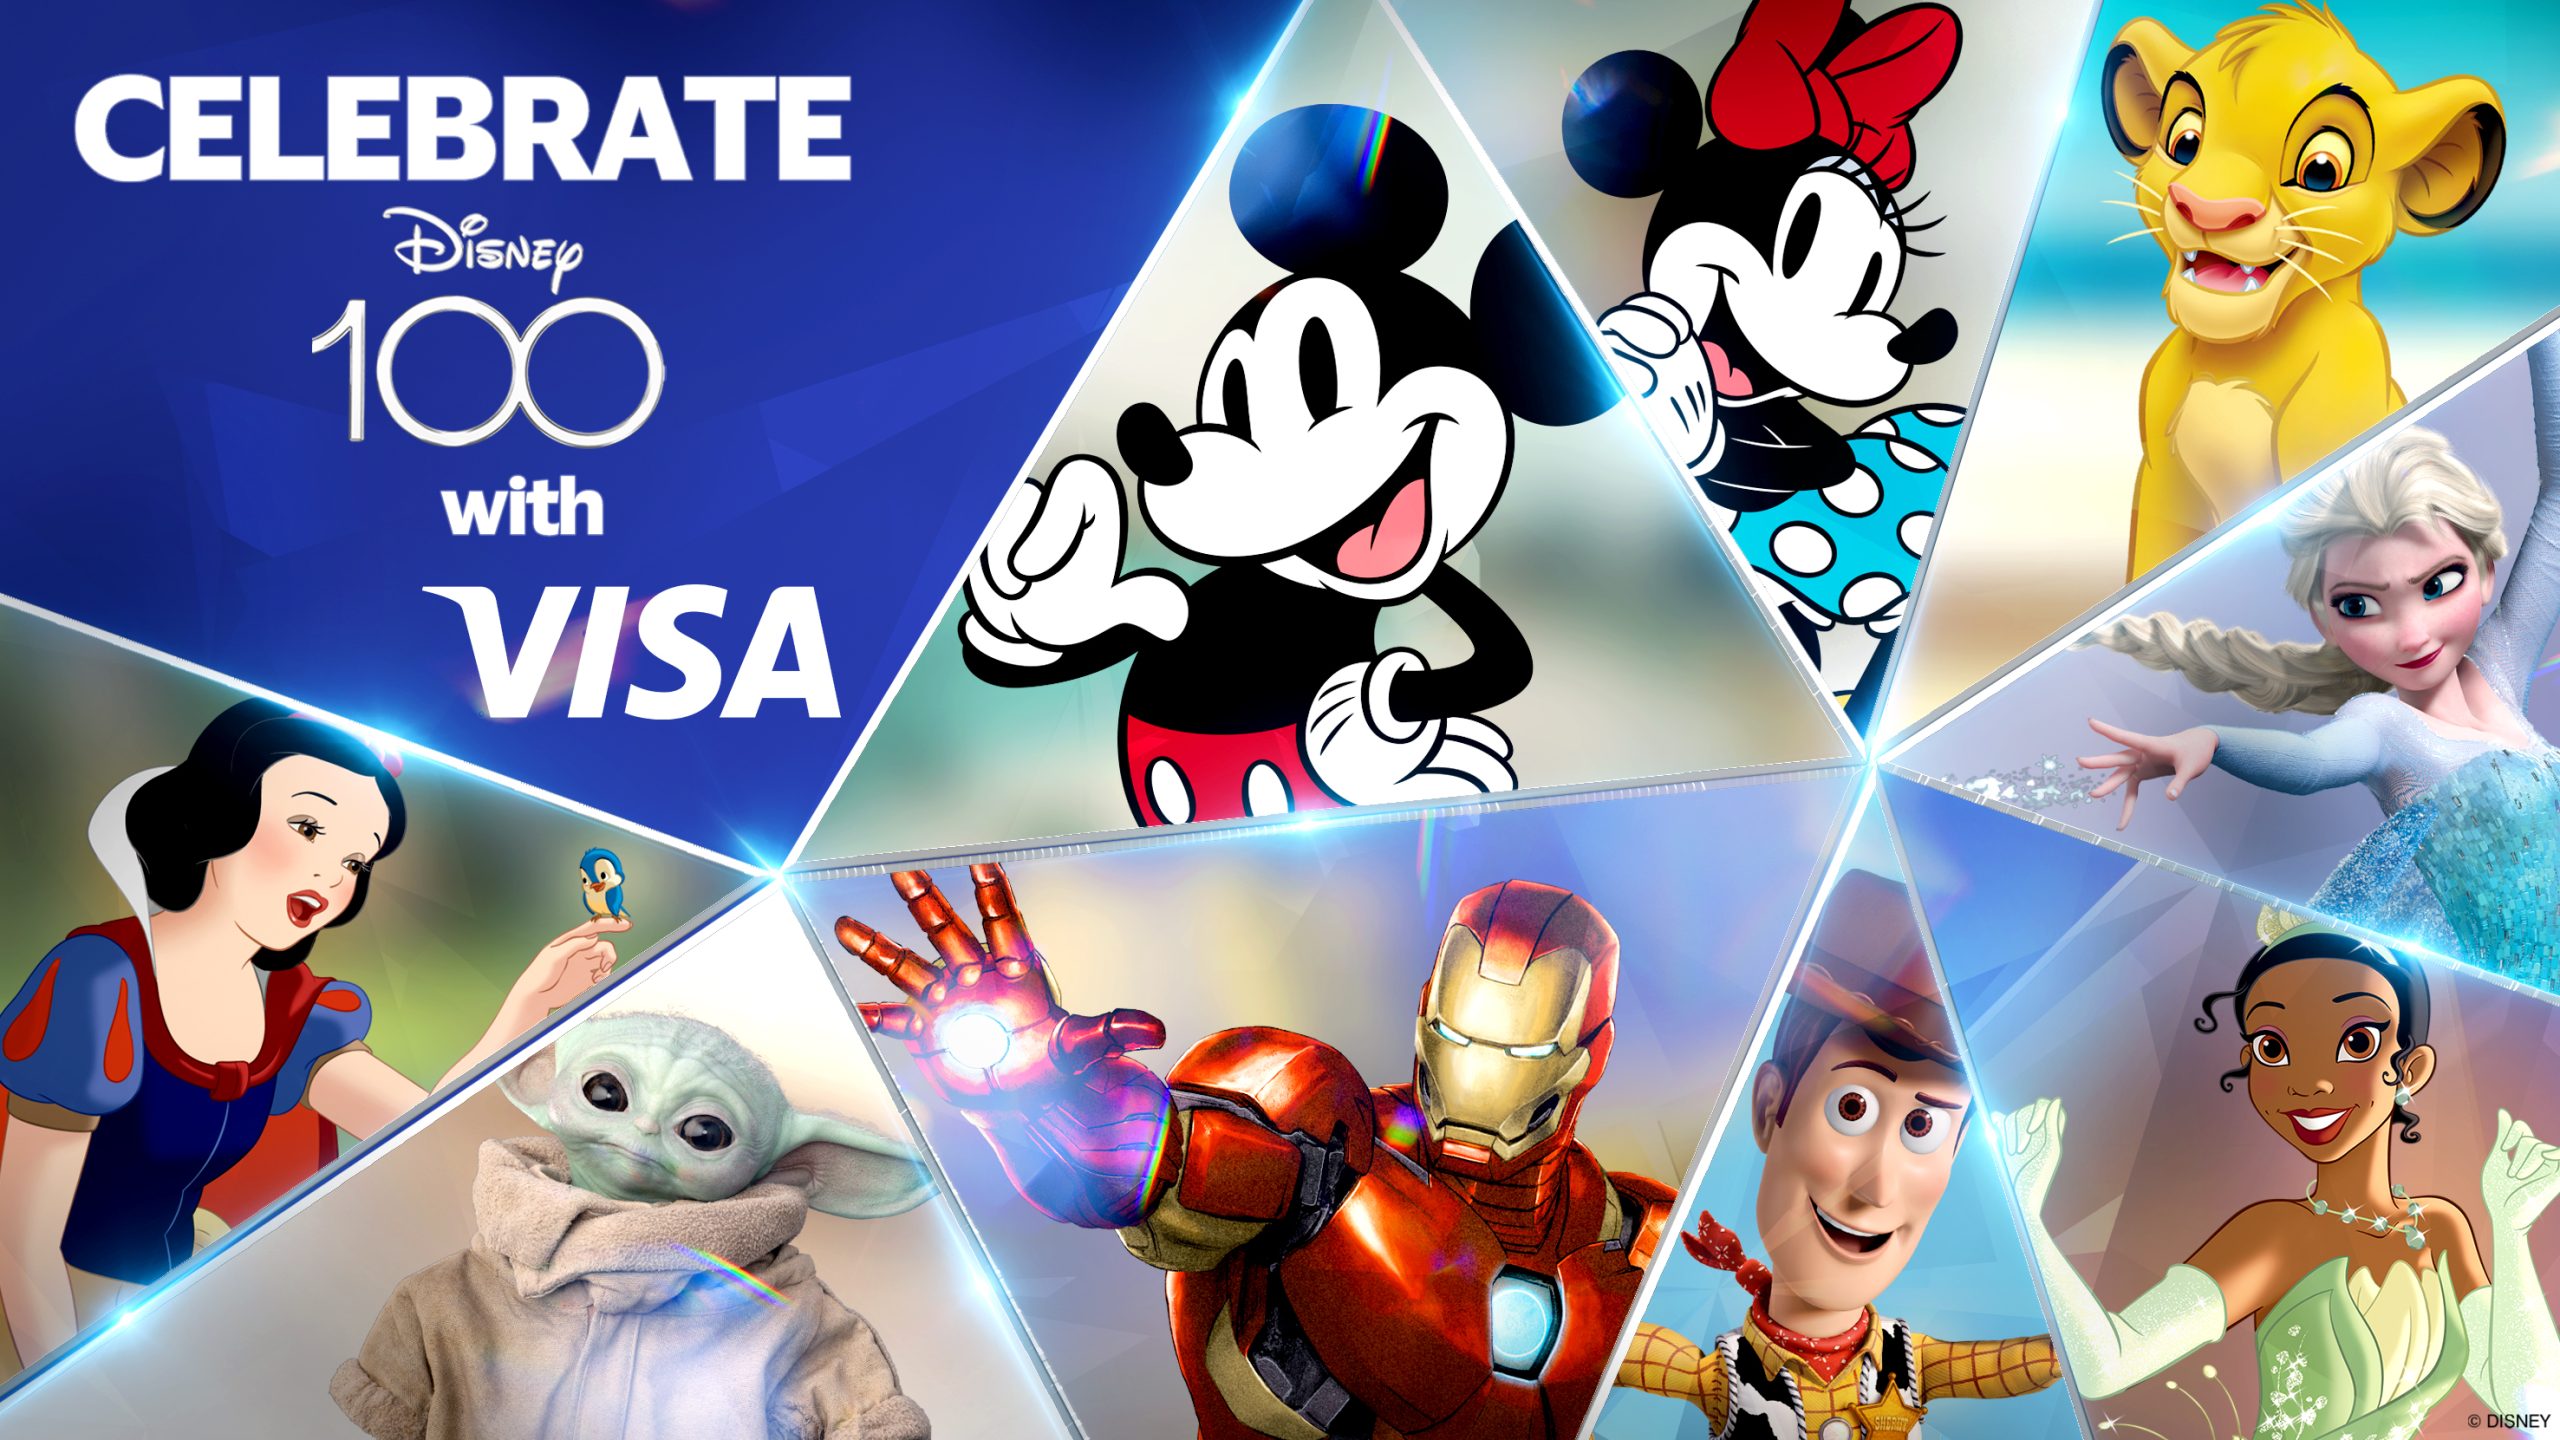 Disney and Visa join forces to celebrate Disney’s 100th anniversary across Europe, the Middle East and Africa